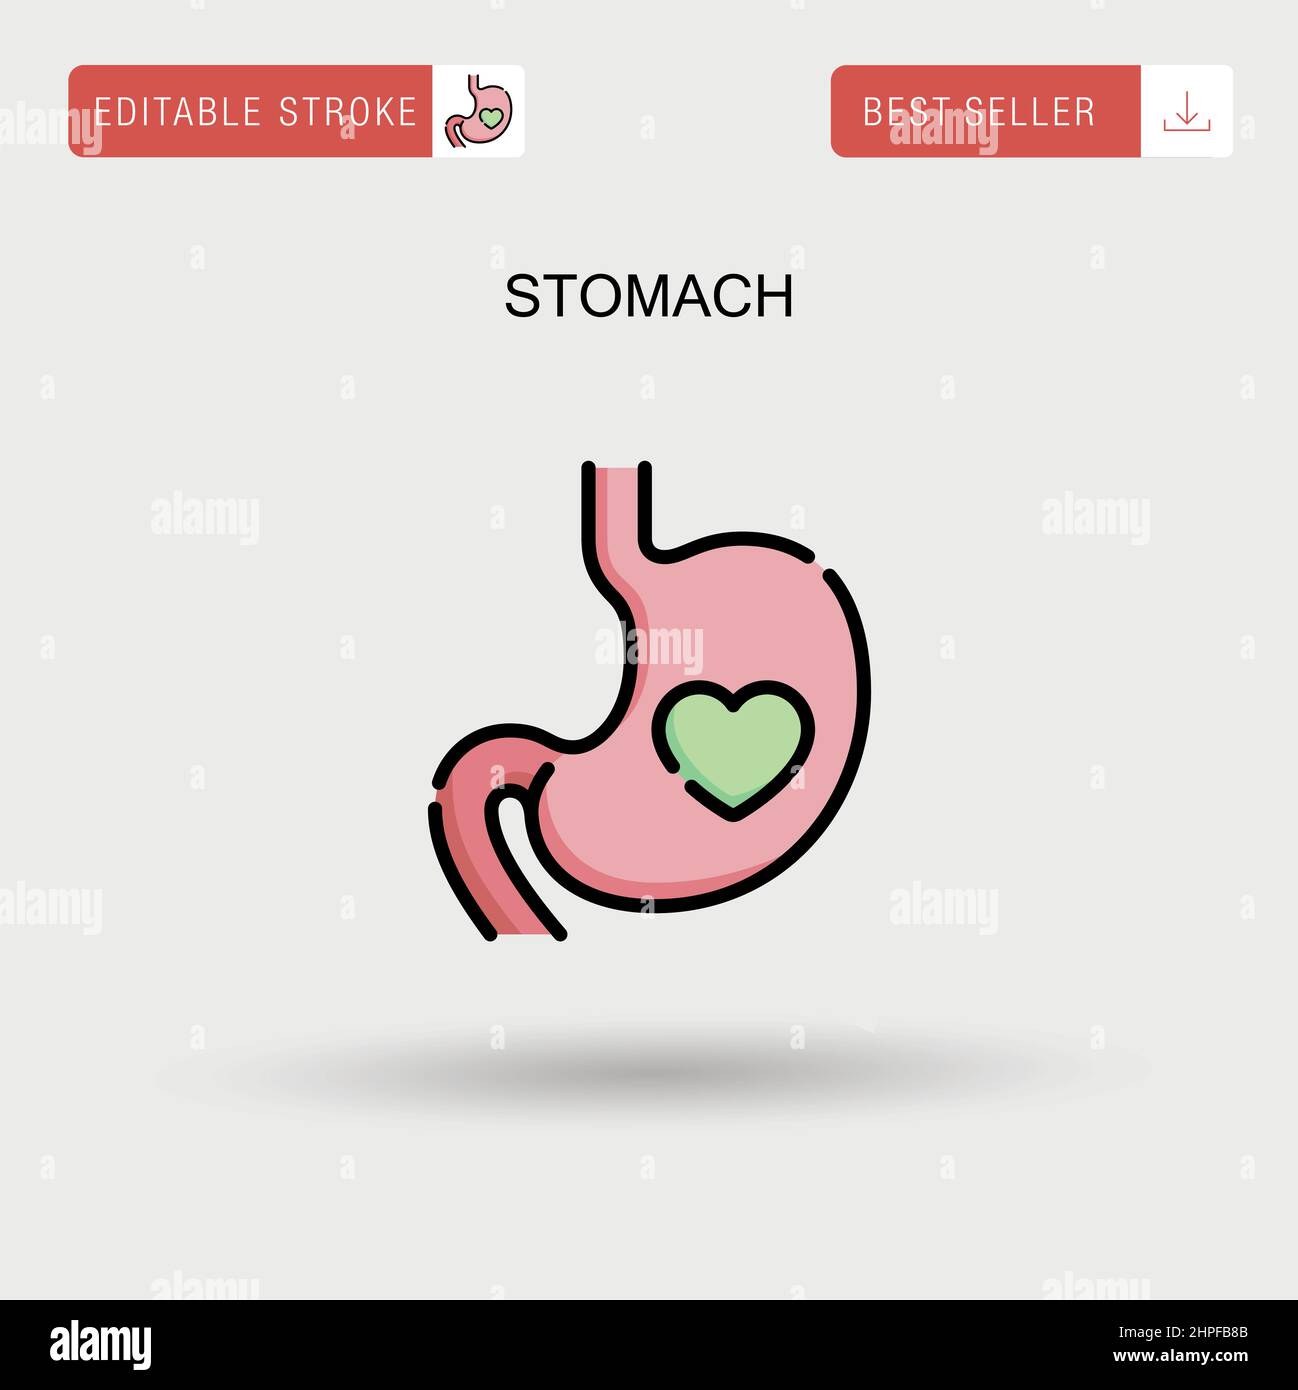 Stomach Simple vector icon. Stock Vector